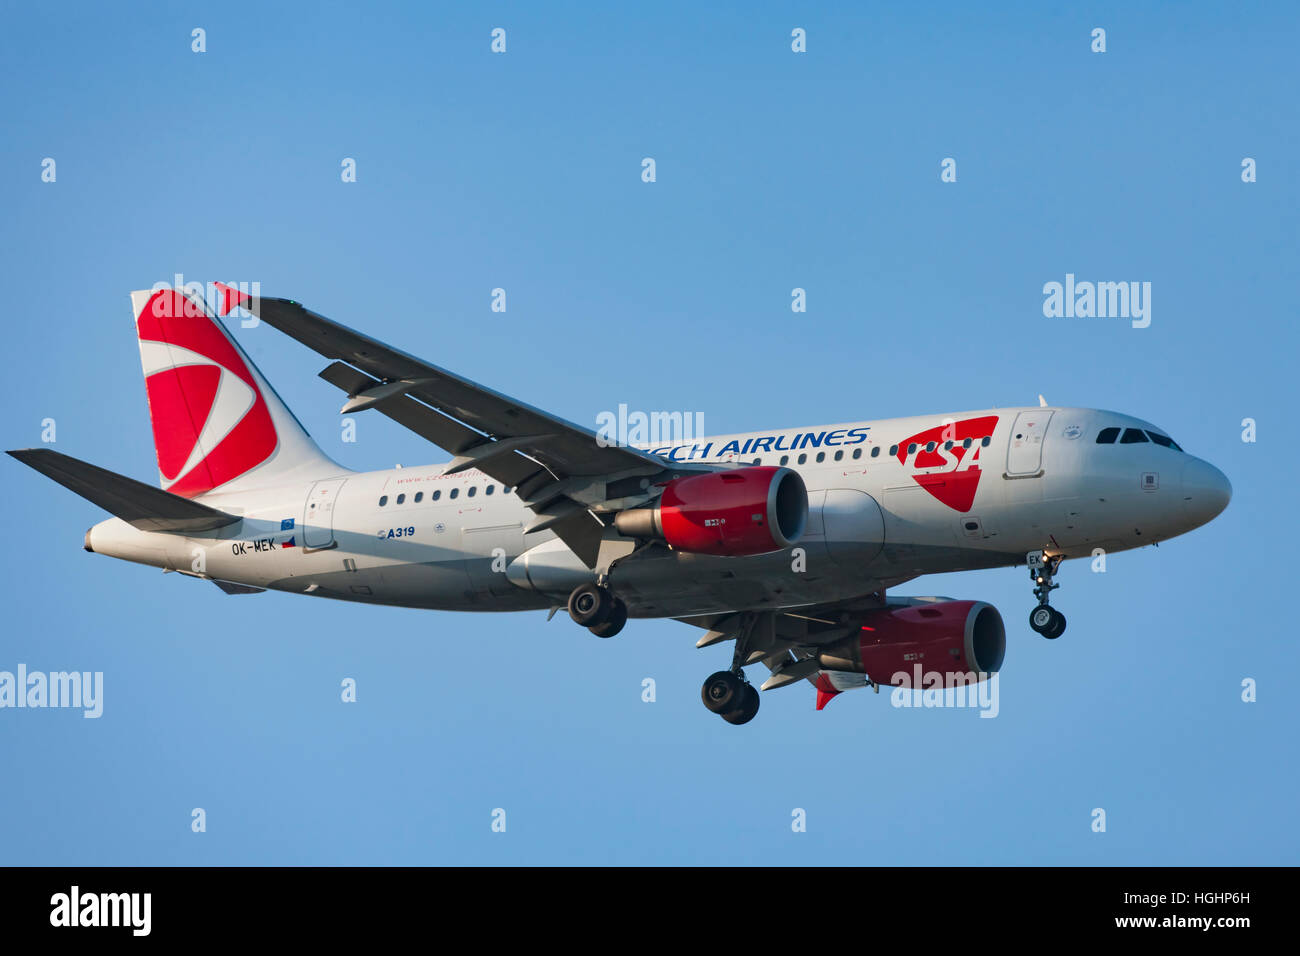 Czech Airlines Airliner Stock Photo